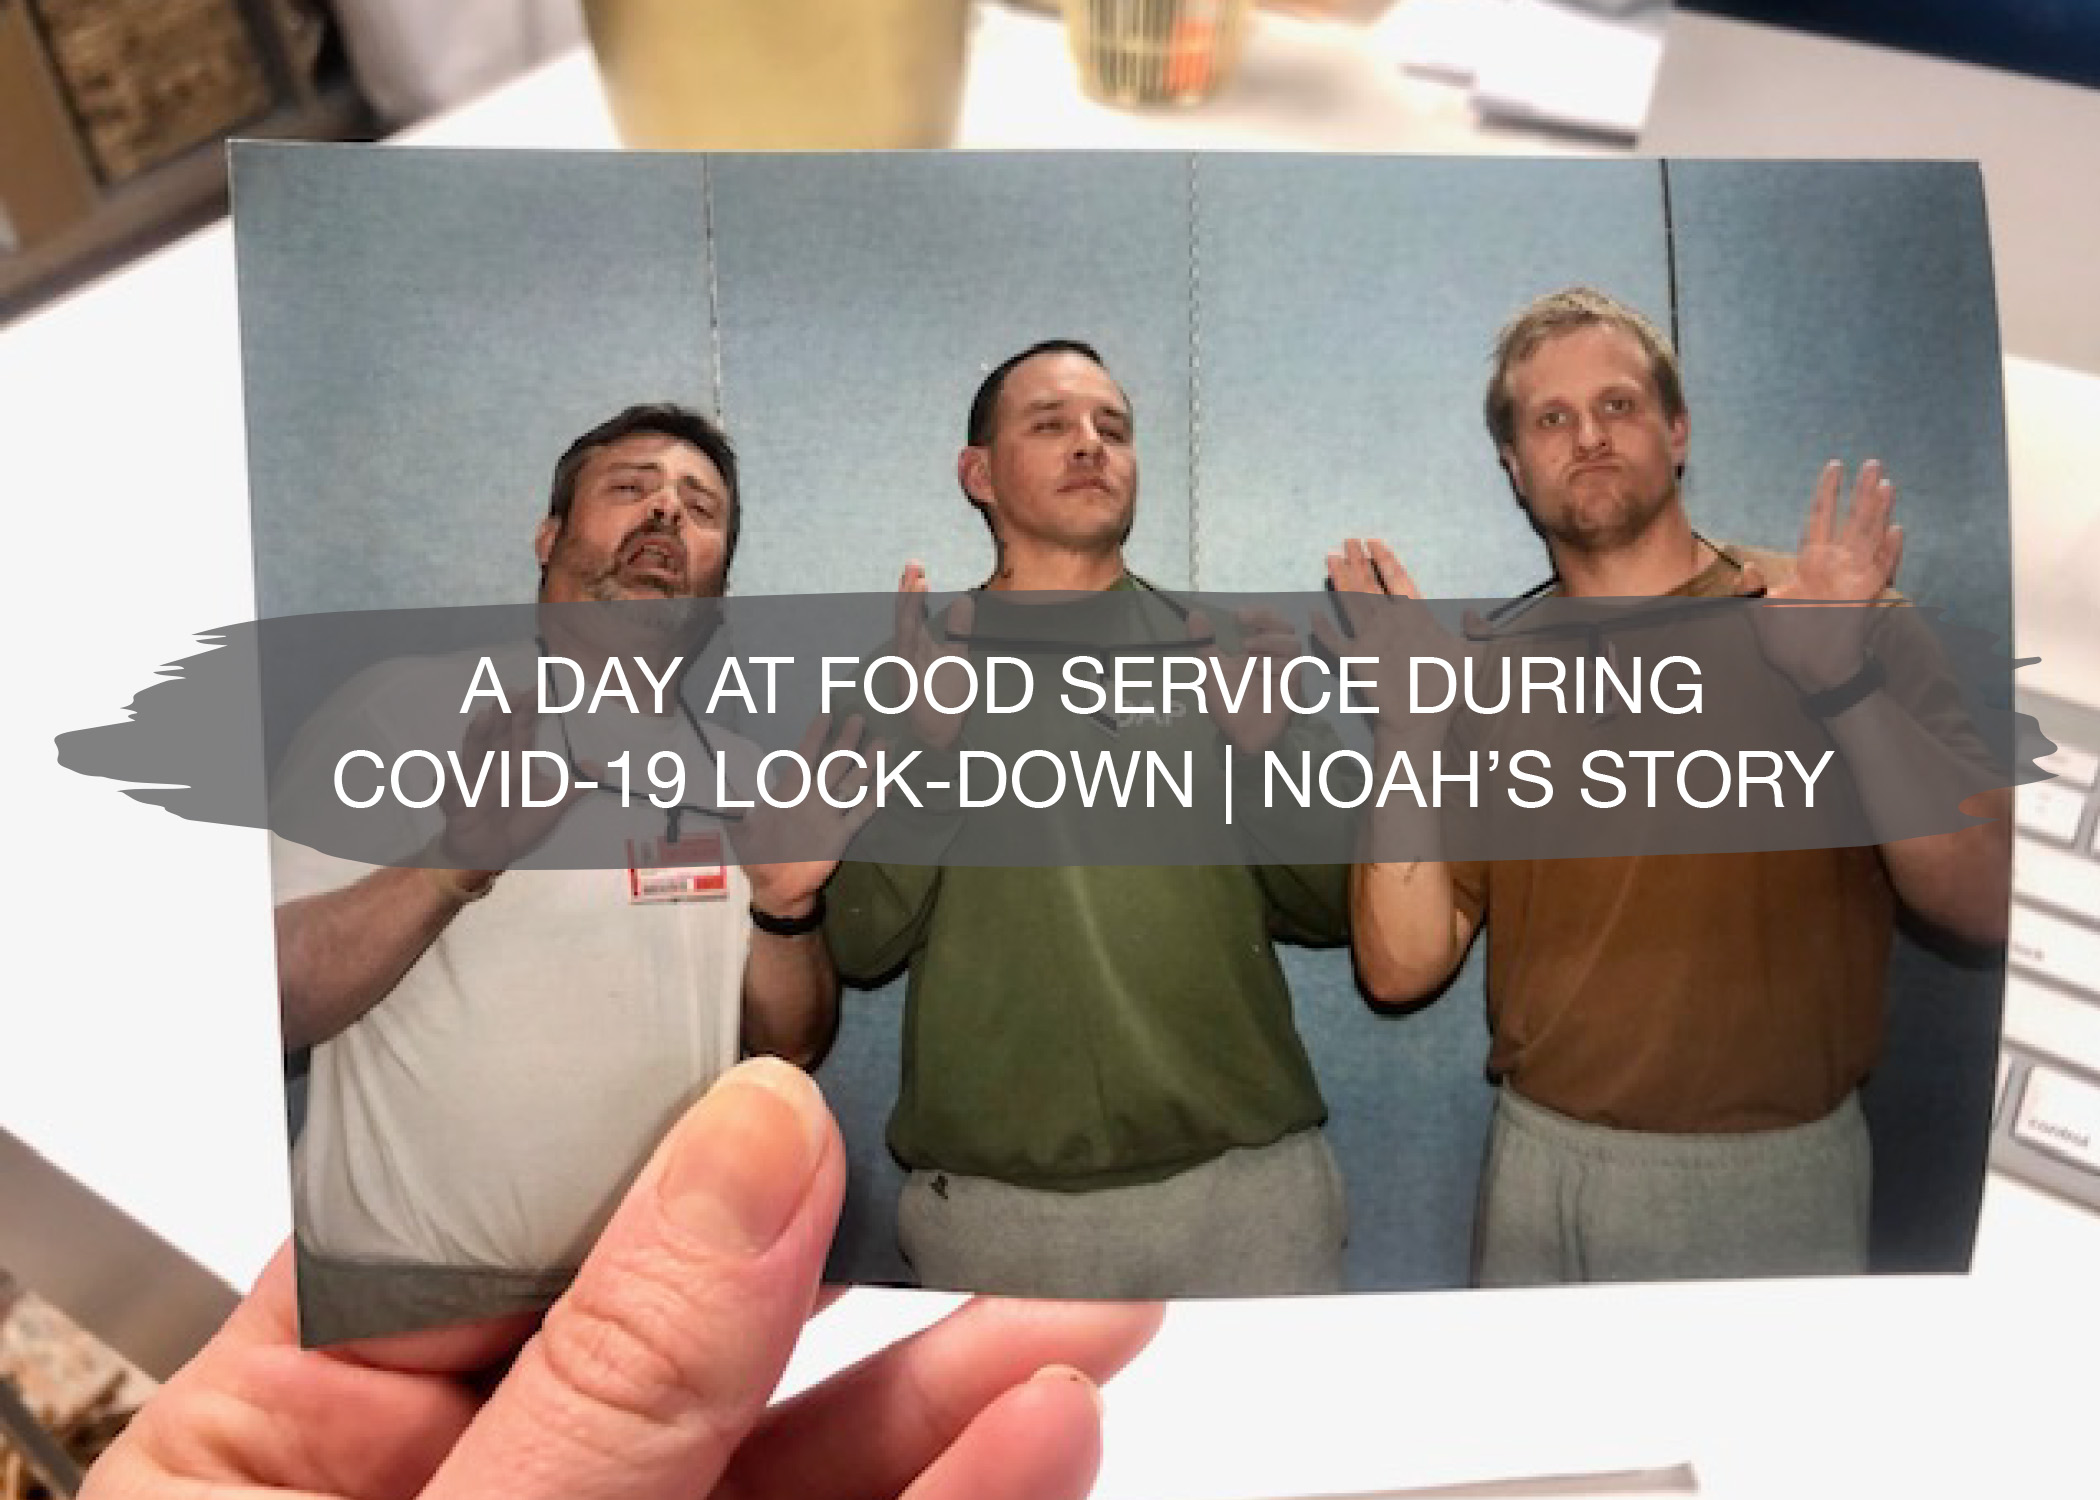 A Day at Food Service During Covid-19 Lock-down | Noah's Story 1